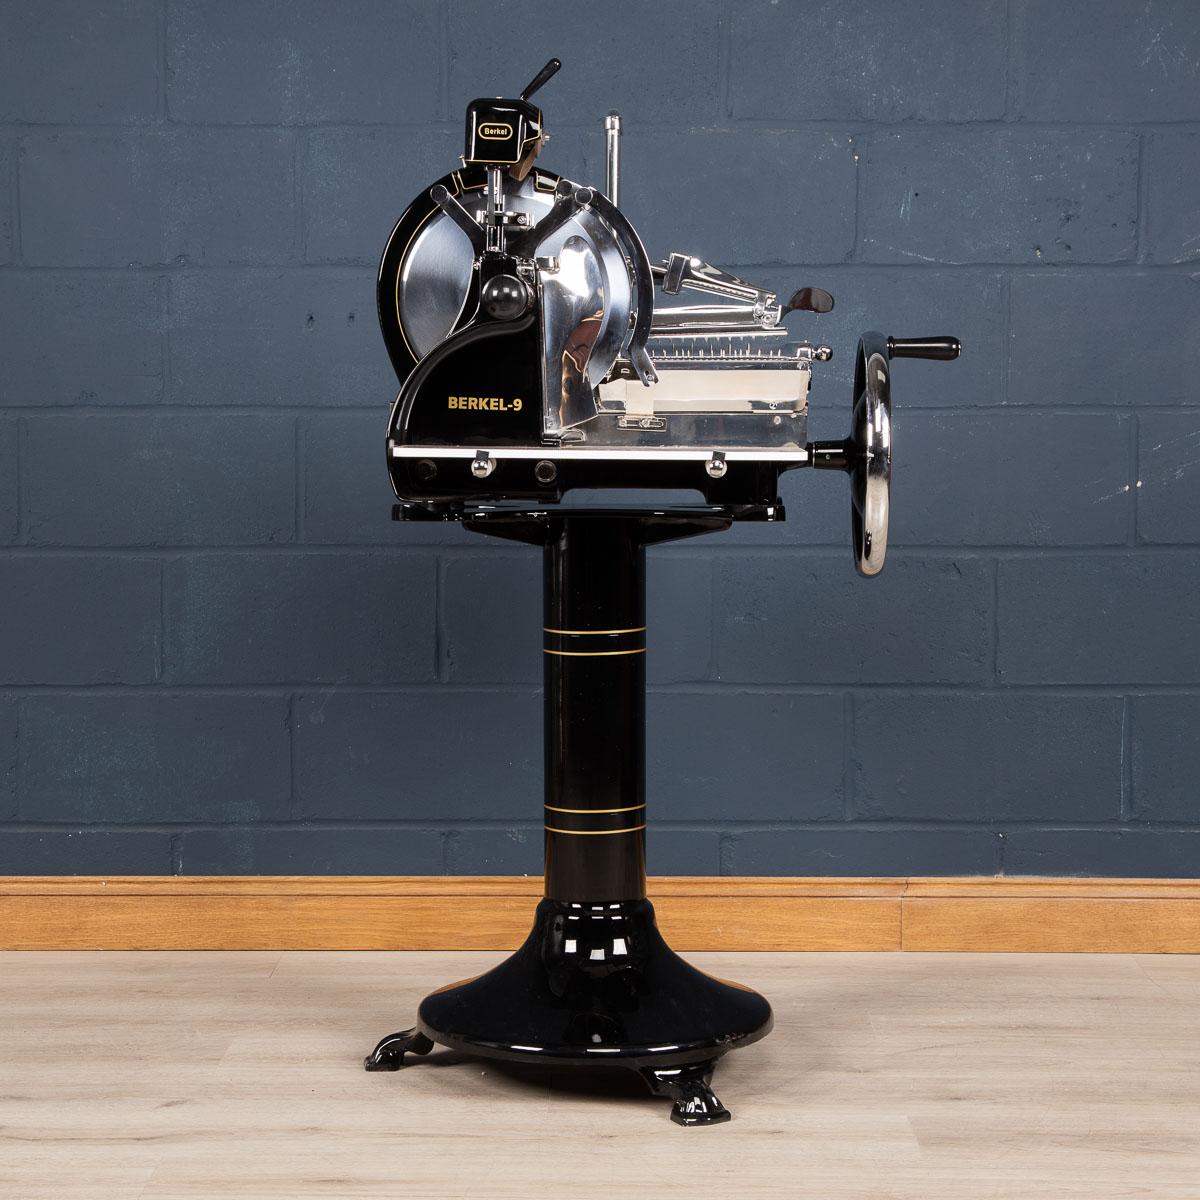 A rare meat slicer made by one of the most famous manufacturers: Berkel, Holland, made in the latter part of the 1930s. This model is an B9 and comes in two parts, the base which can be removed from the main machine and placed on a counter. Perfect